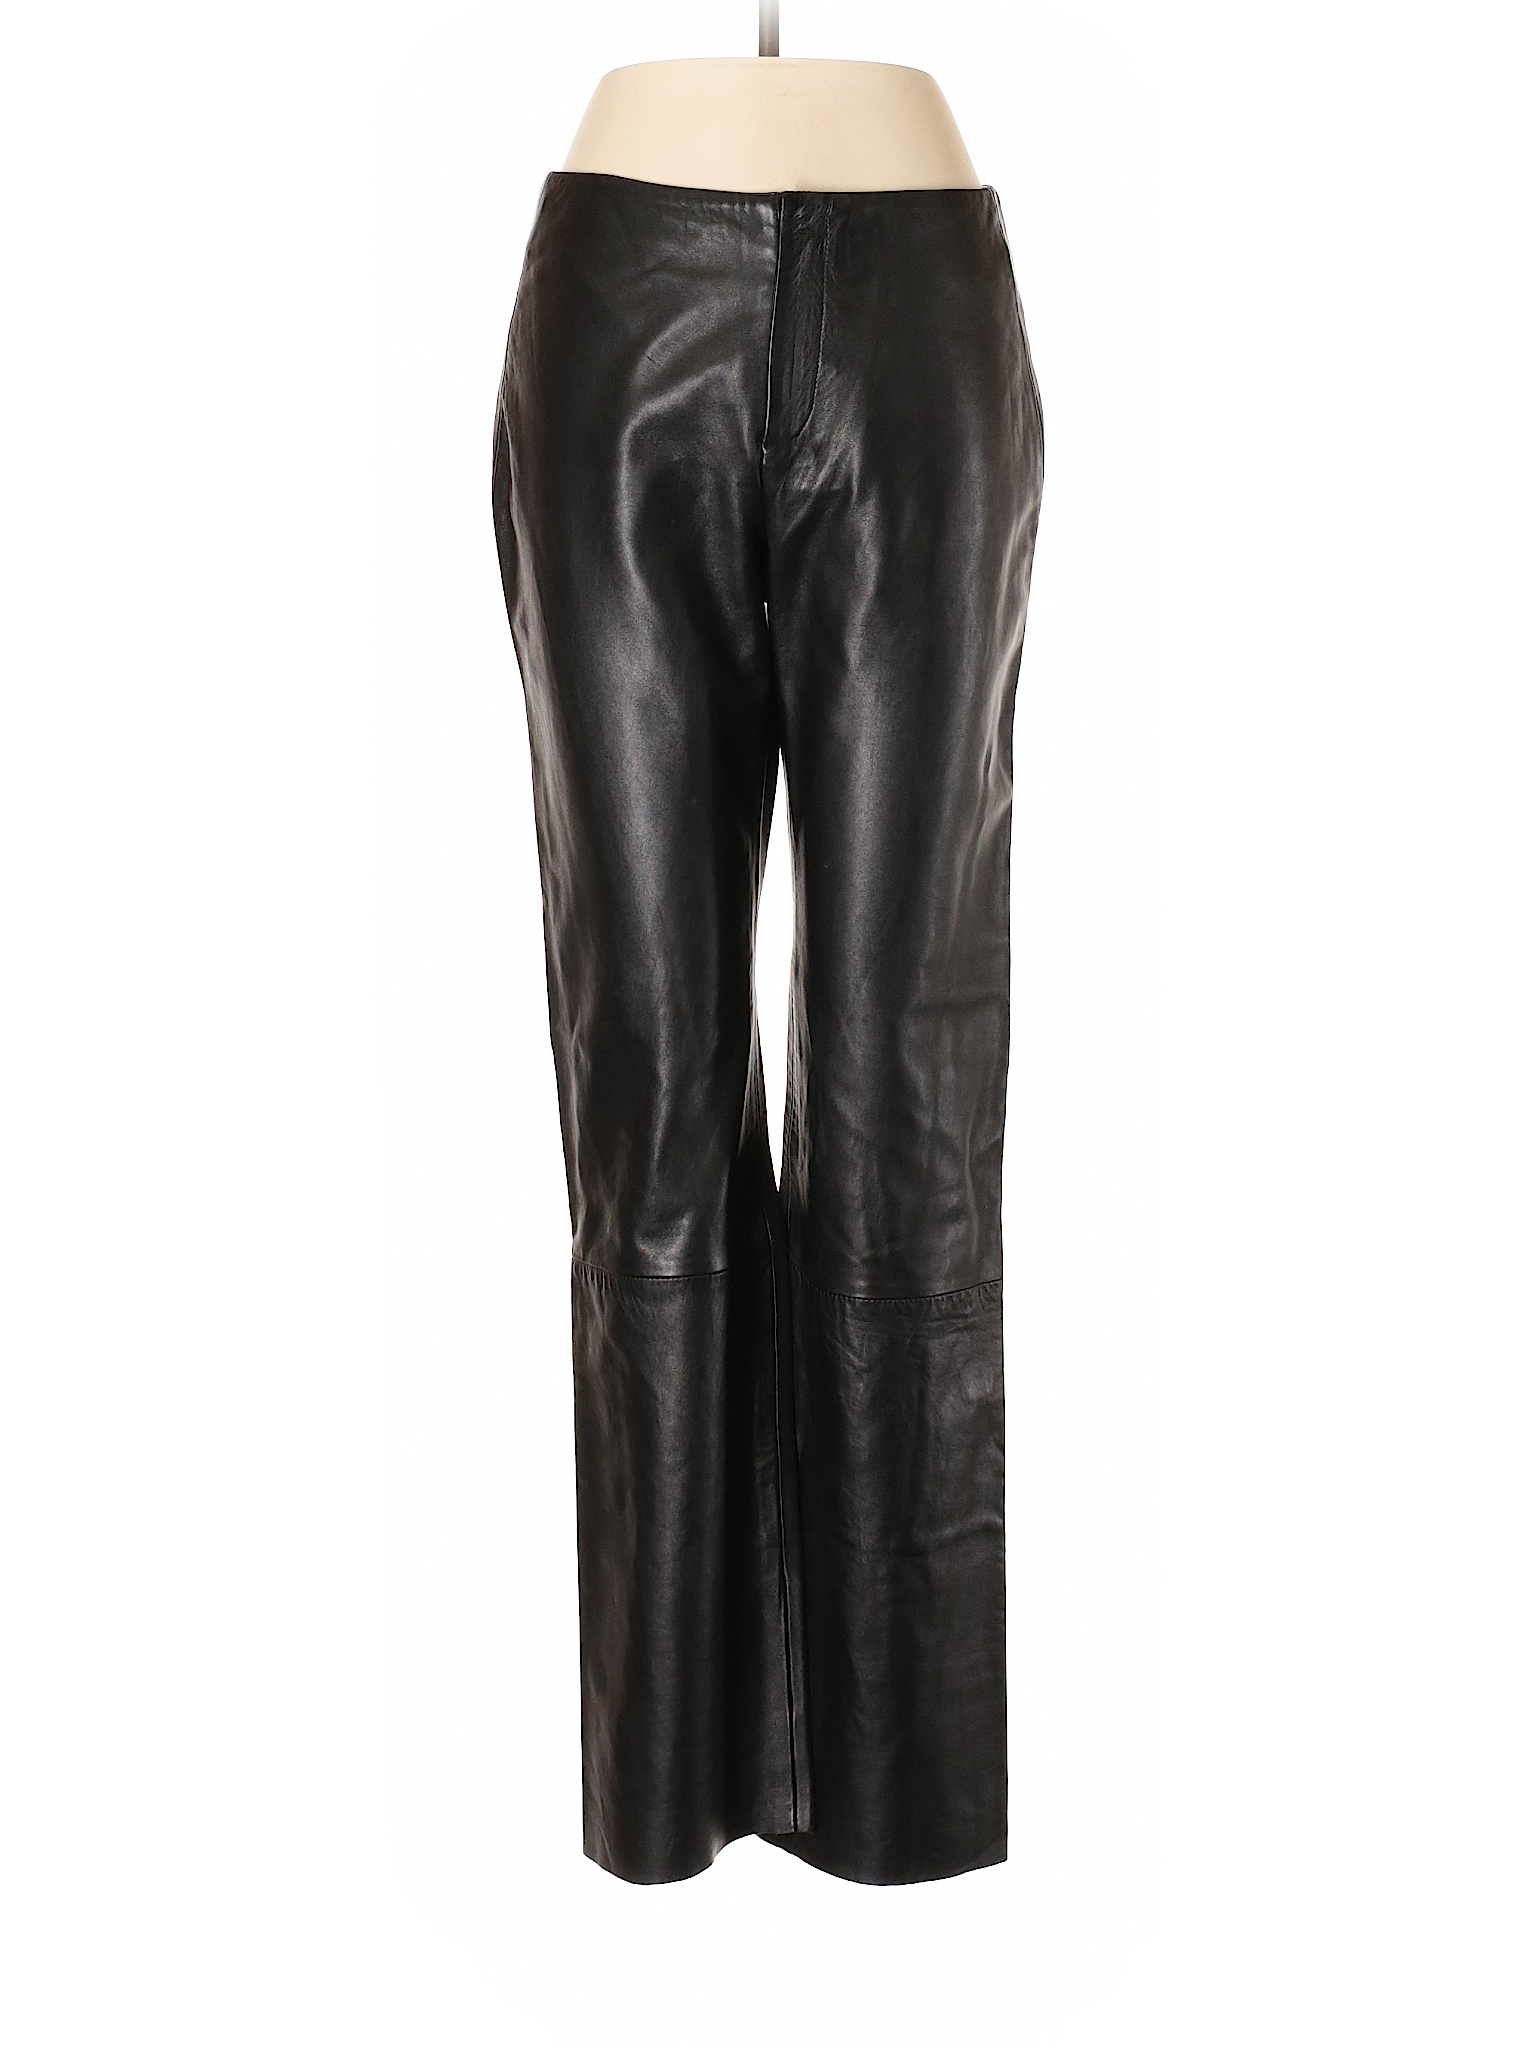 Banana Republic 100% Leather Solid Black Leather Pants Size 2 - 88% off ...